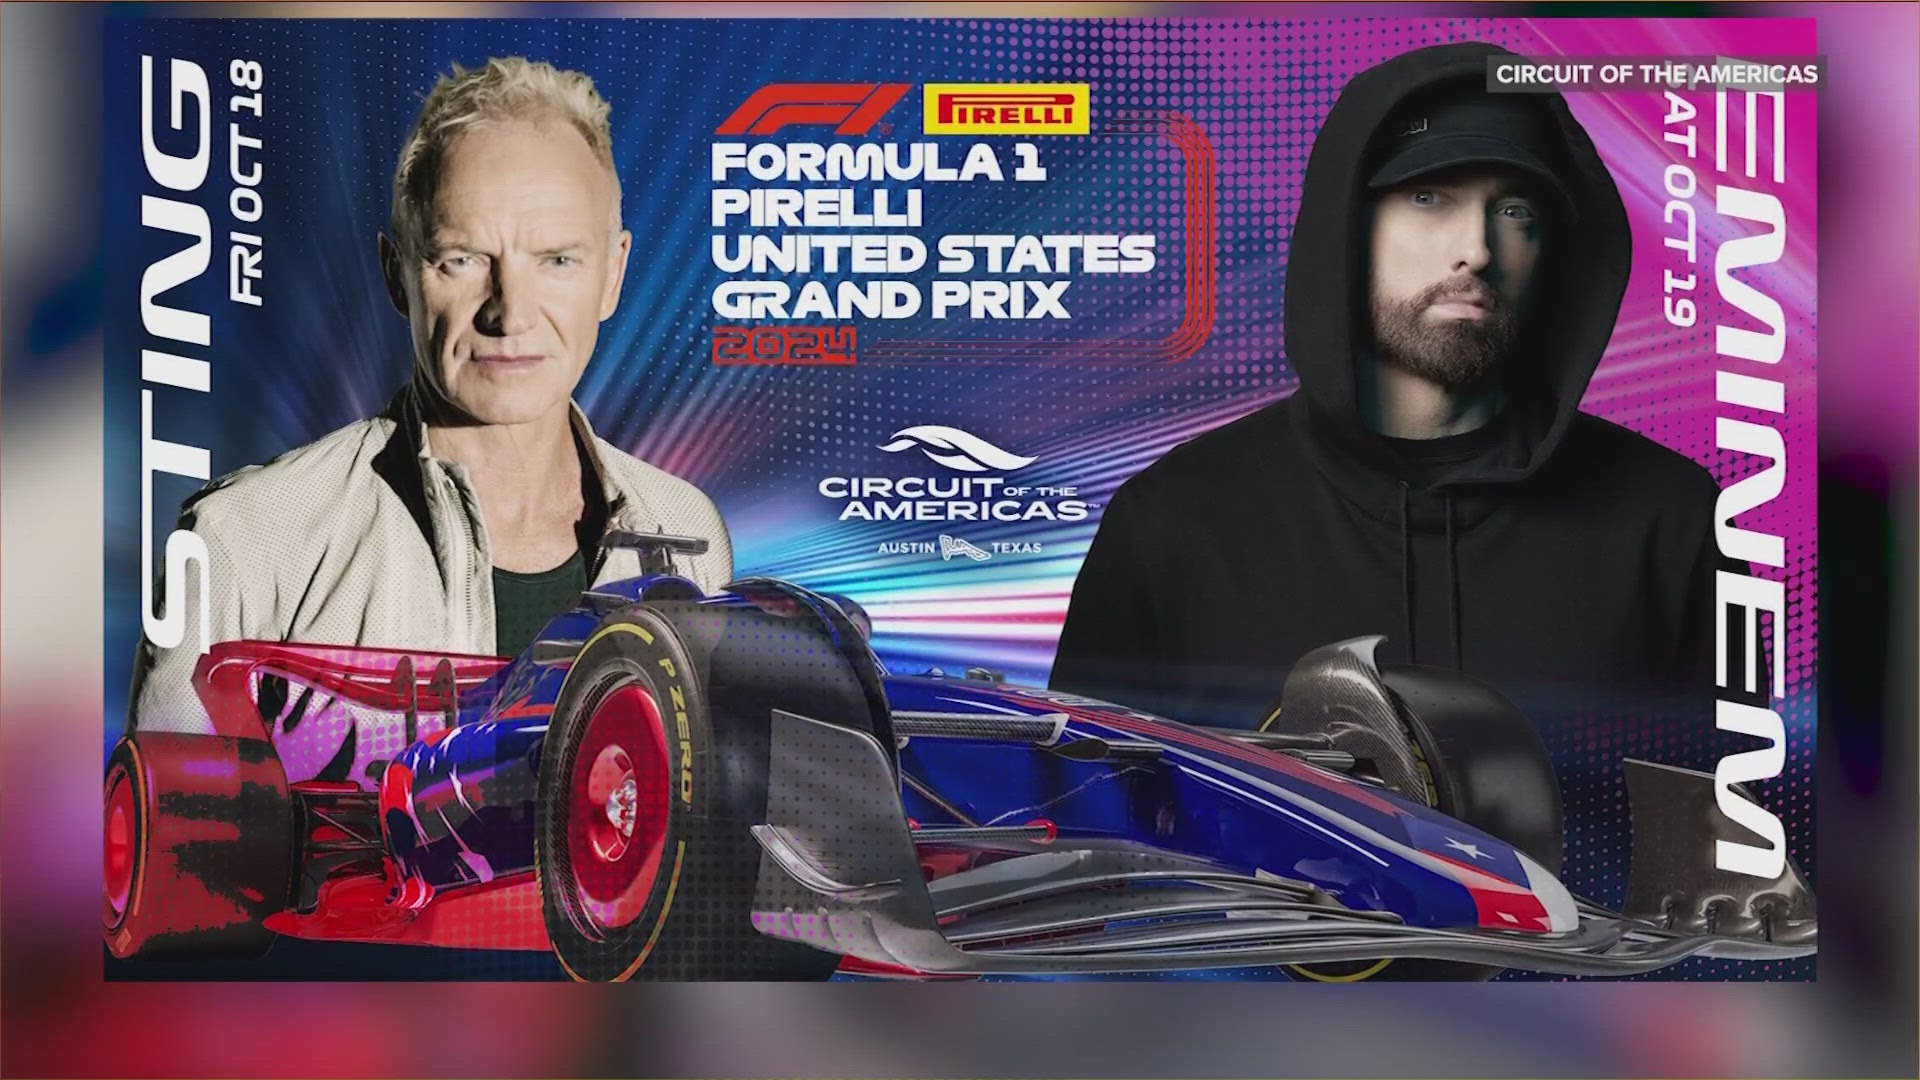 Sting and Eminem will headline race weekend for the Formula One U.S. Grand Prix at Circuit of the Americas.